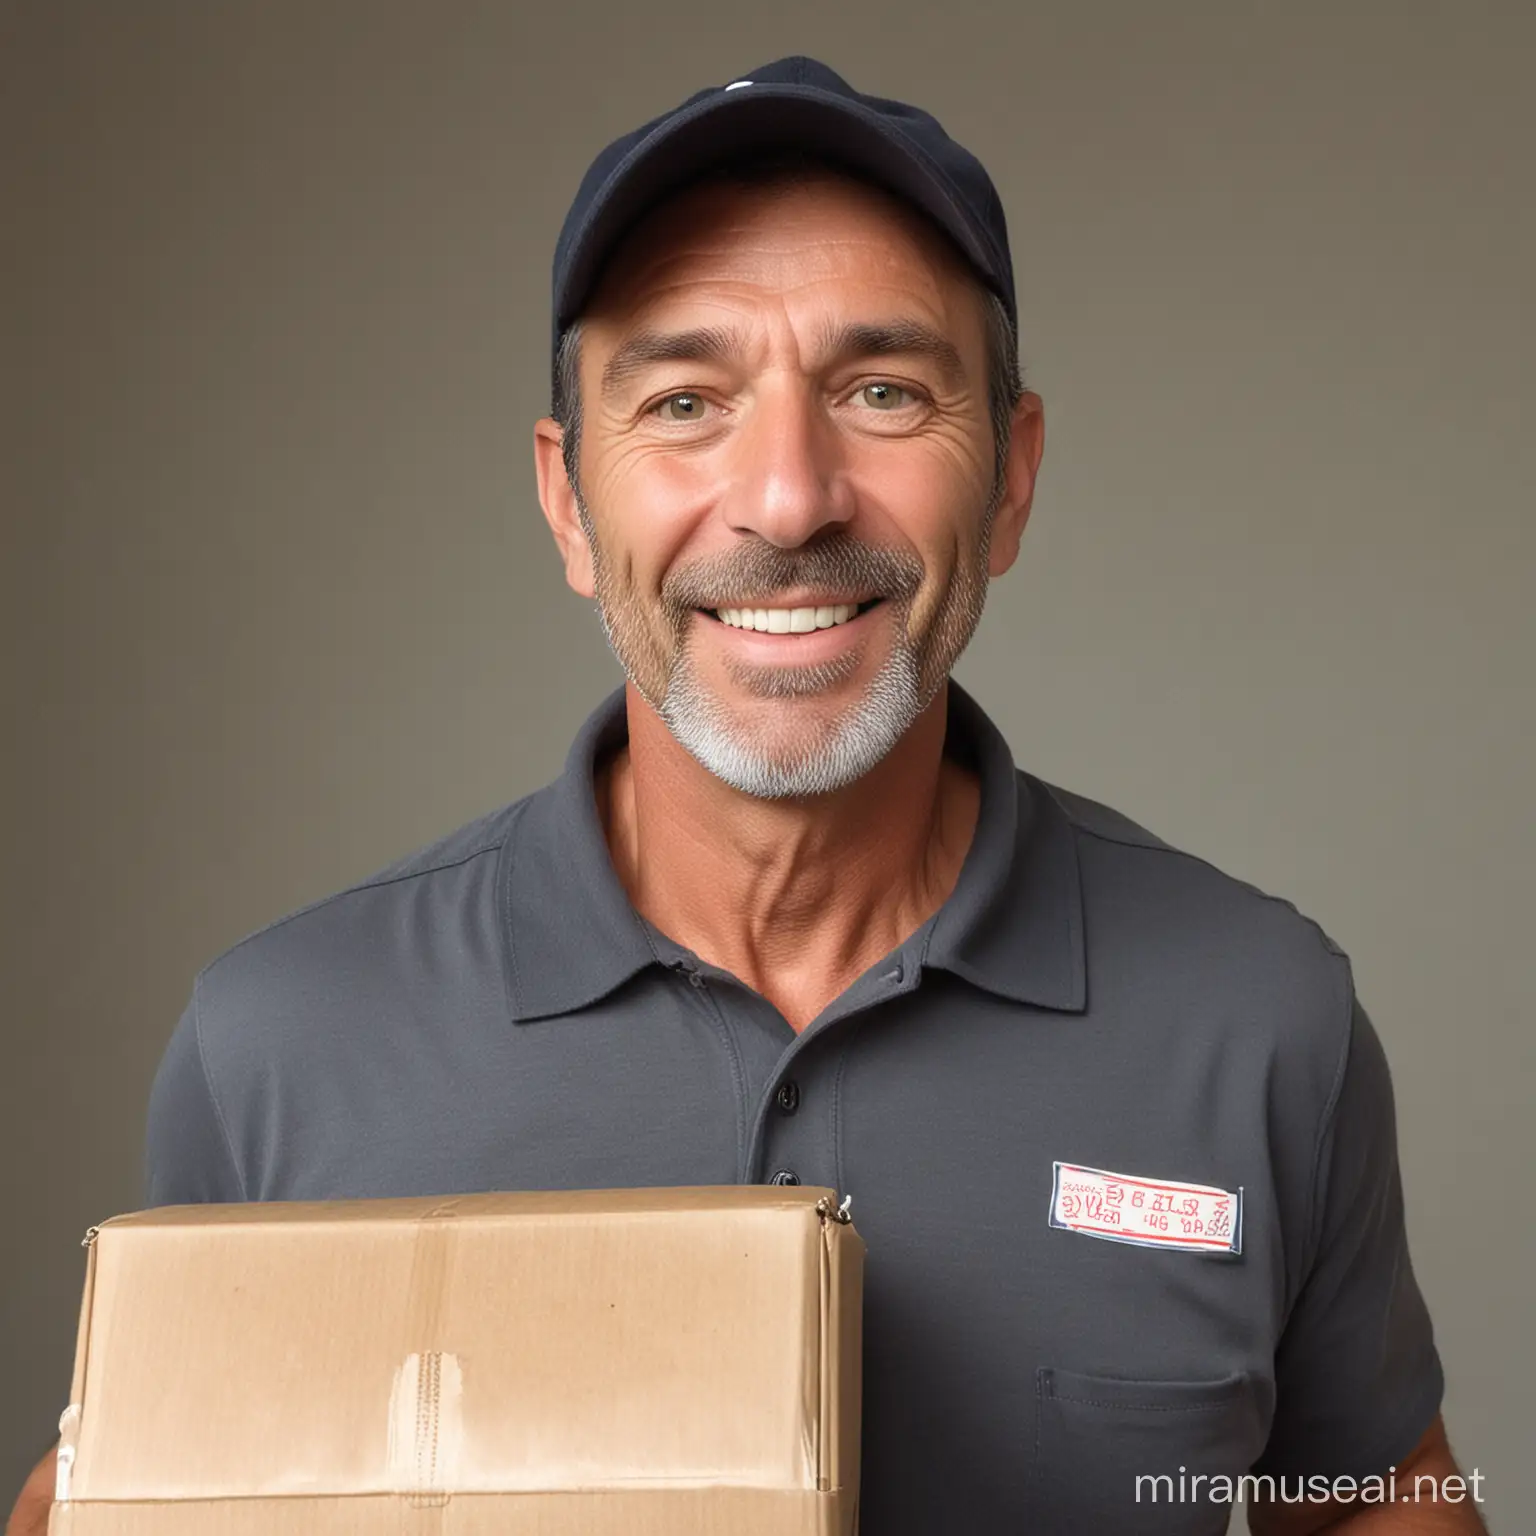 A 52 year old mail man. He looks energetic and content.